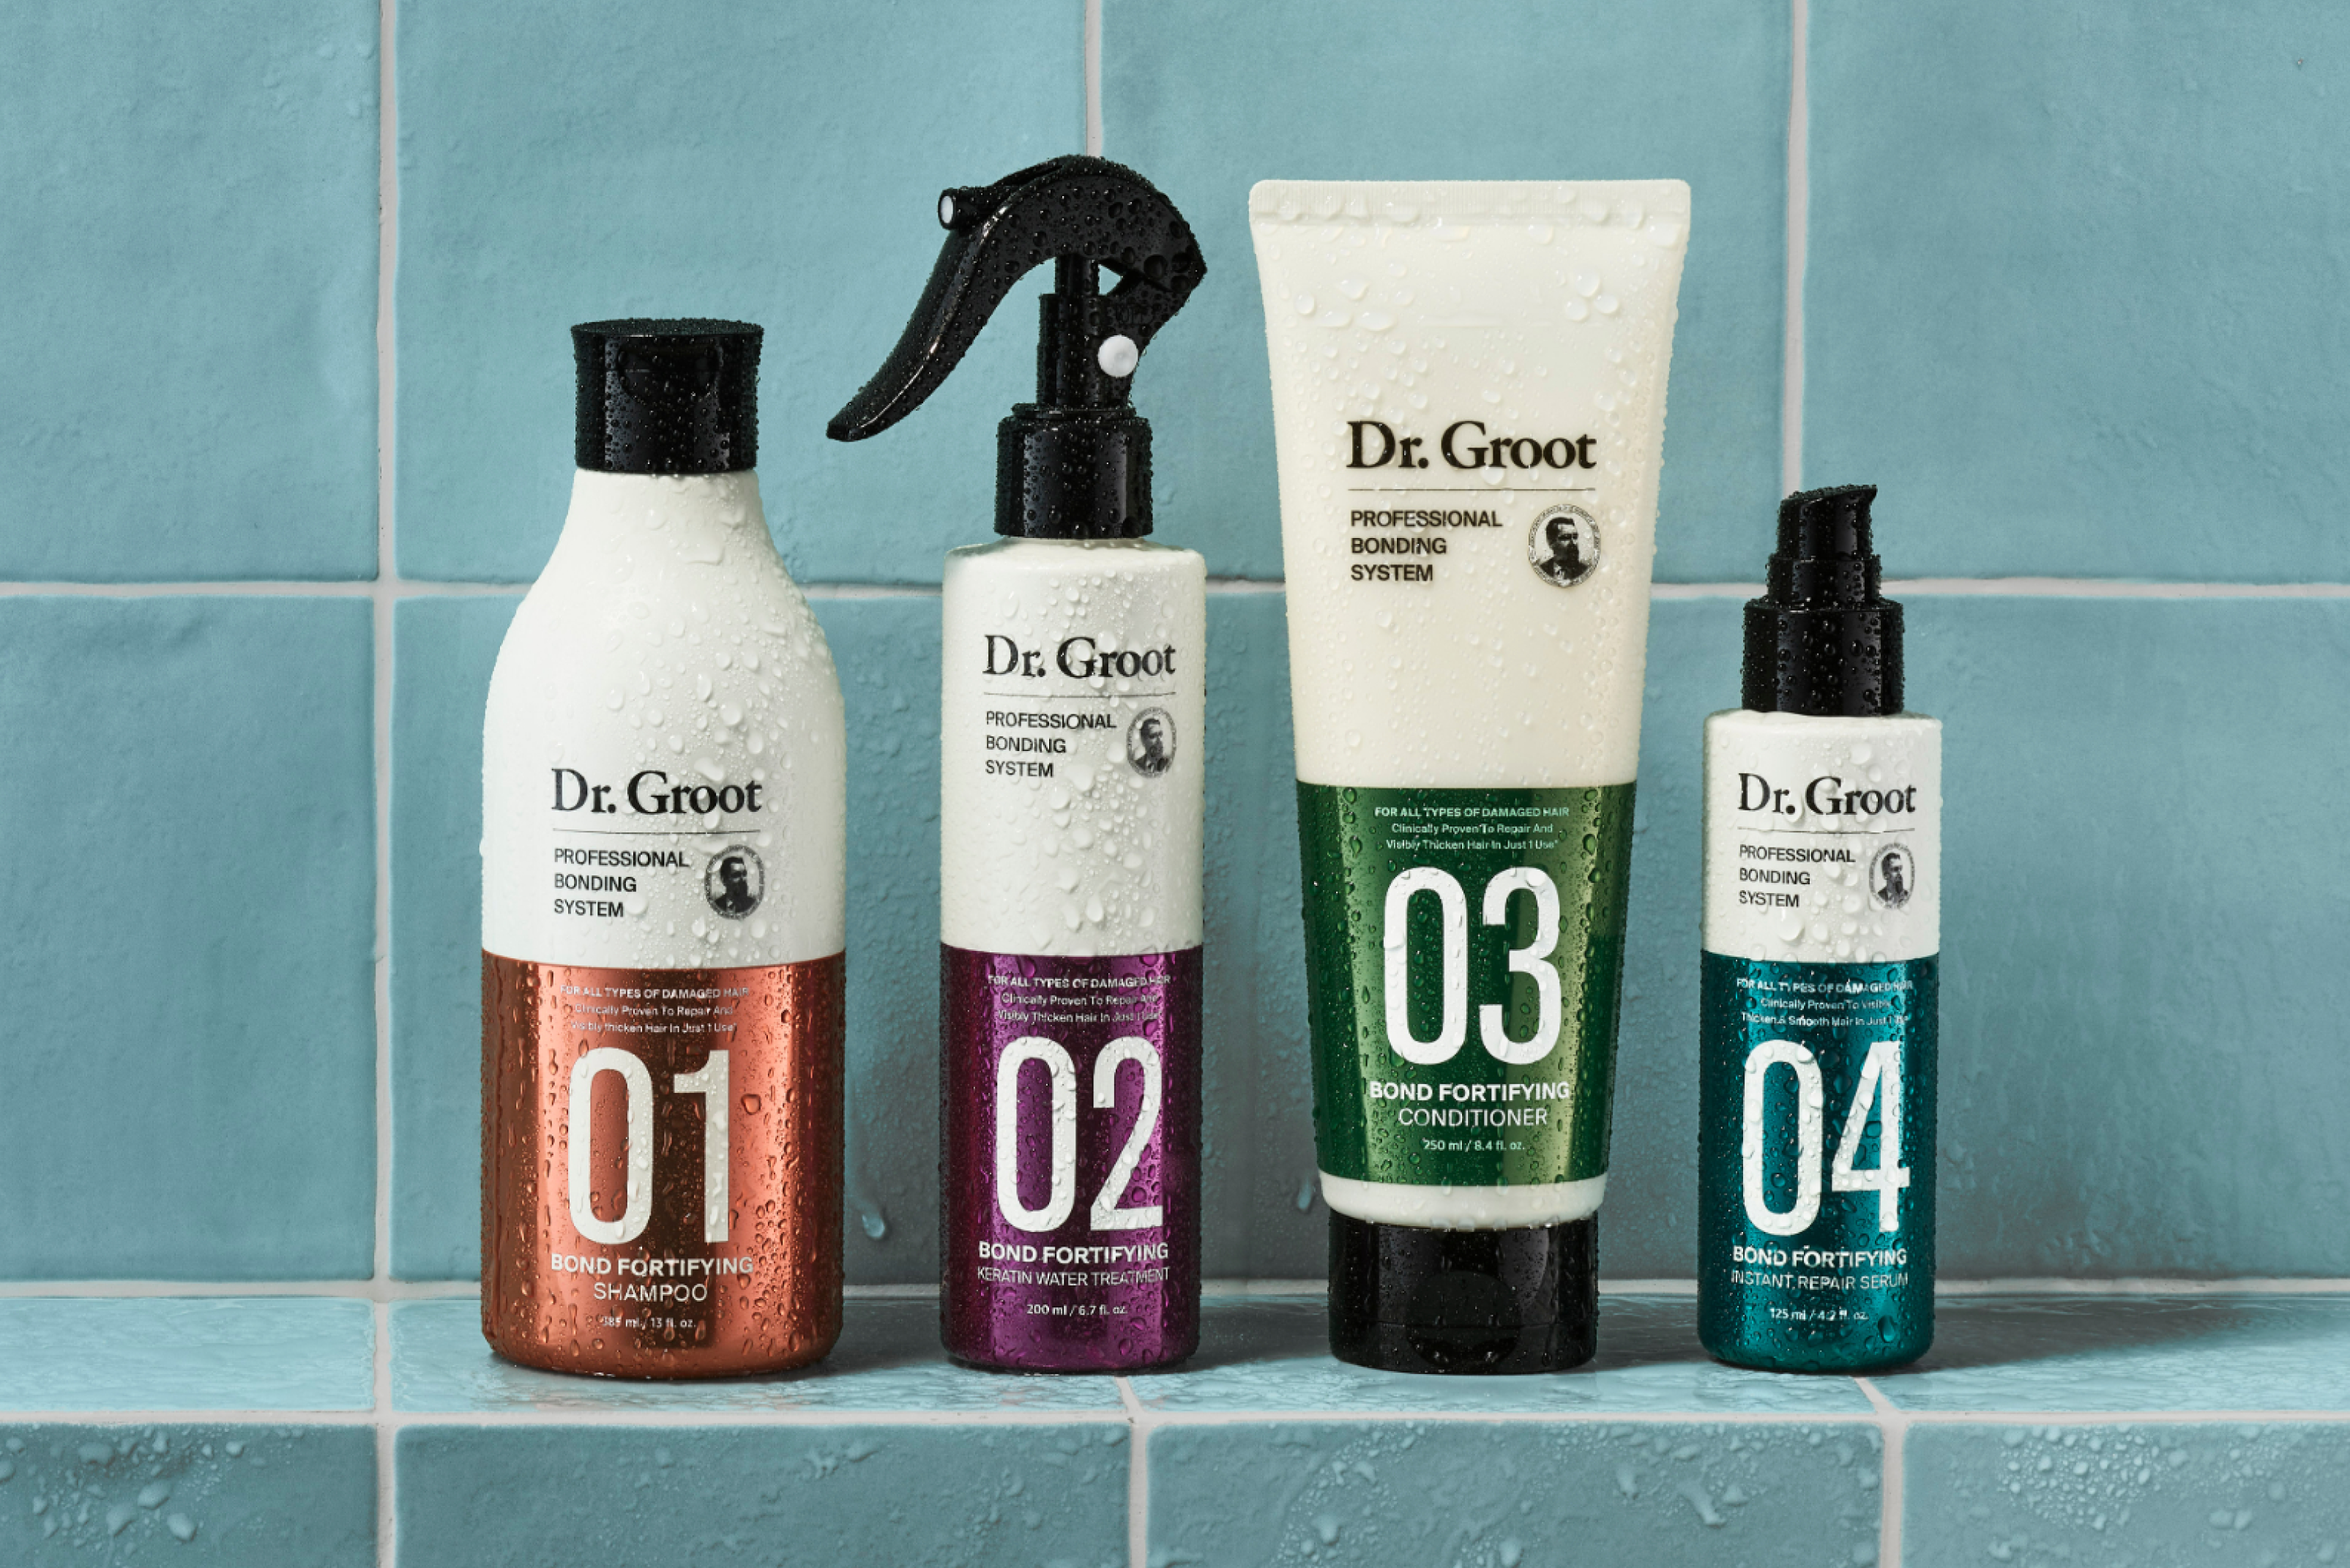 The full collection of Dr. Groot Professional Bonding System products rest on a bathroom shelf.